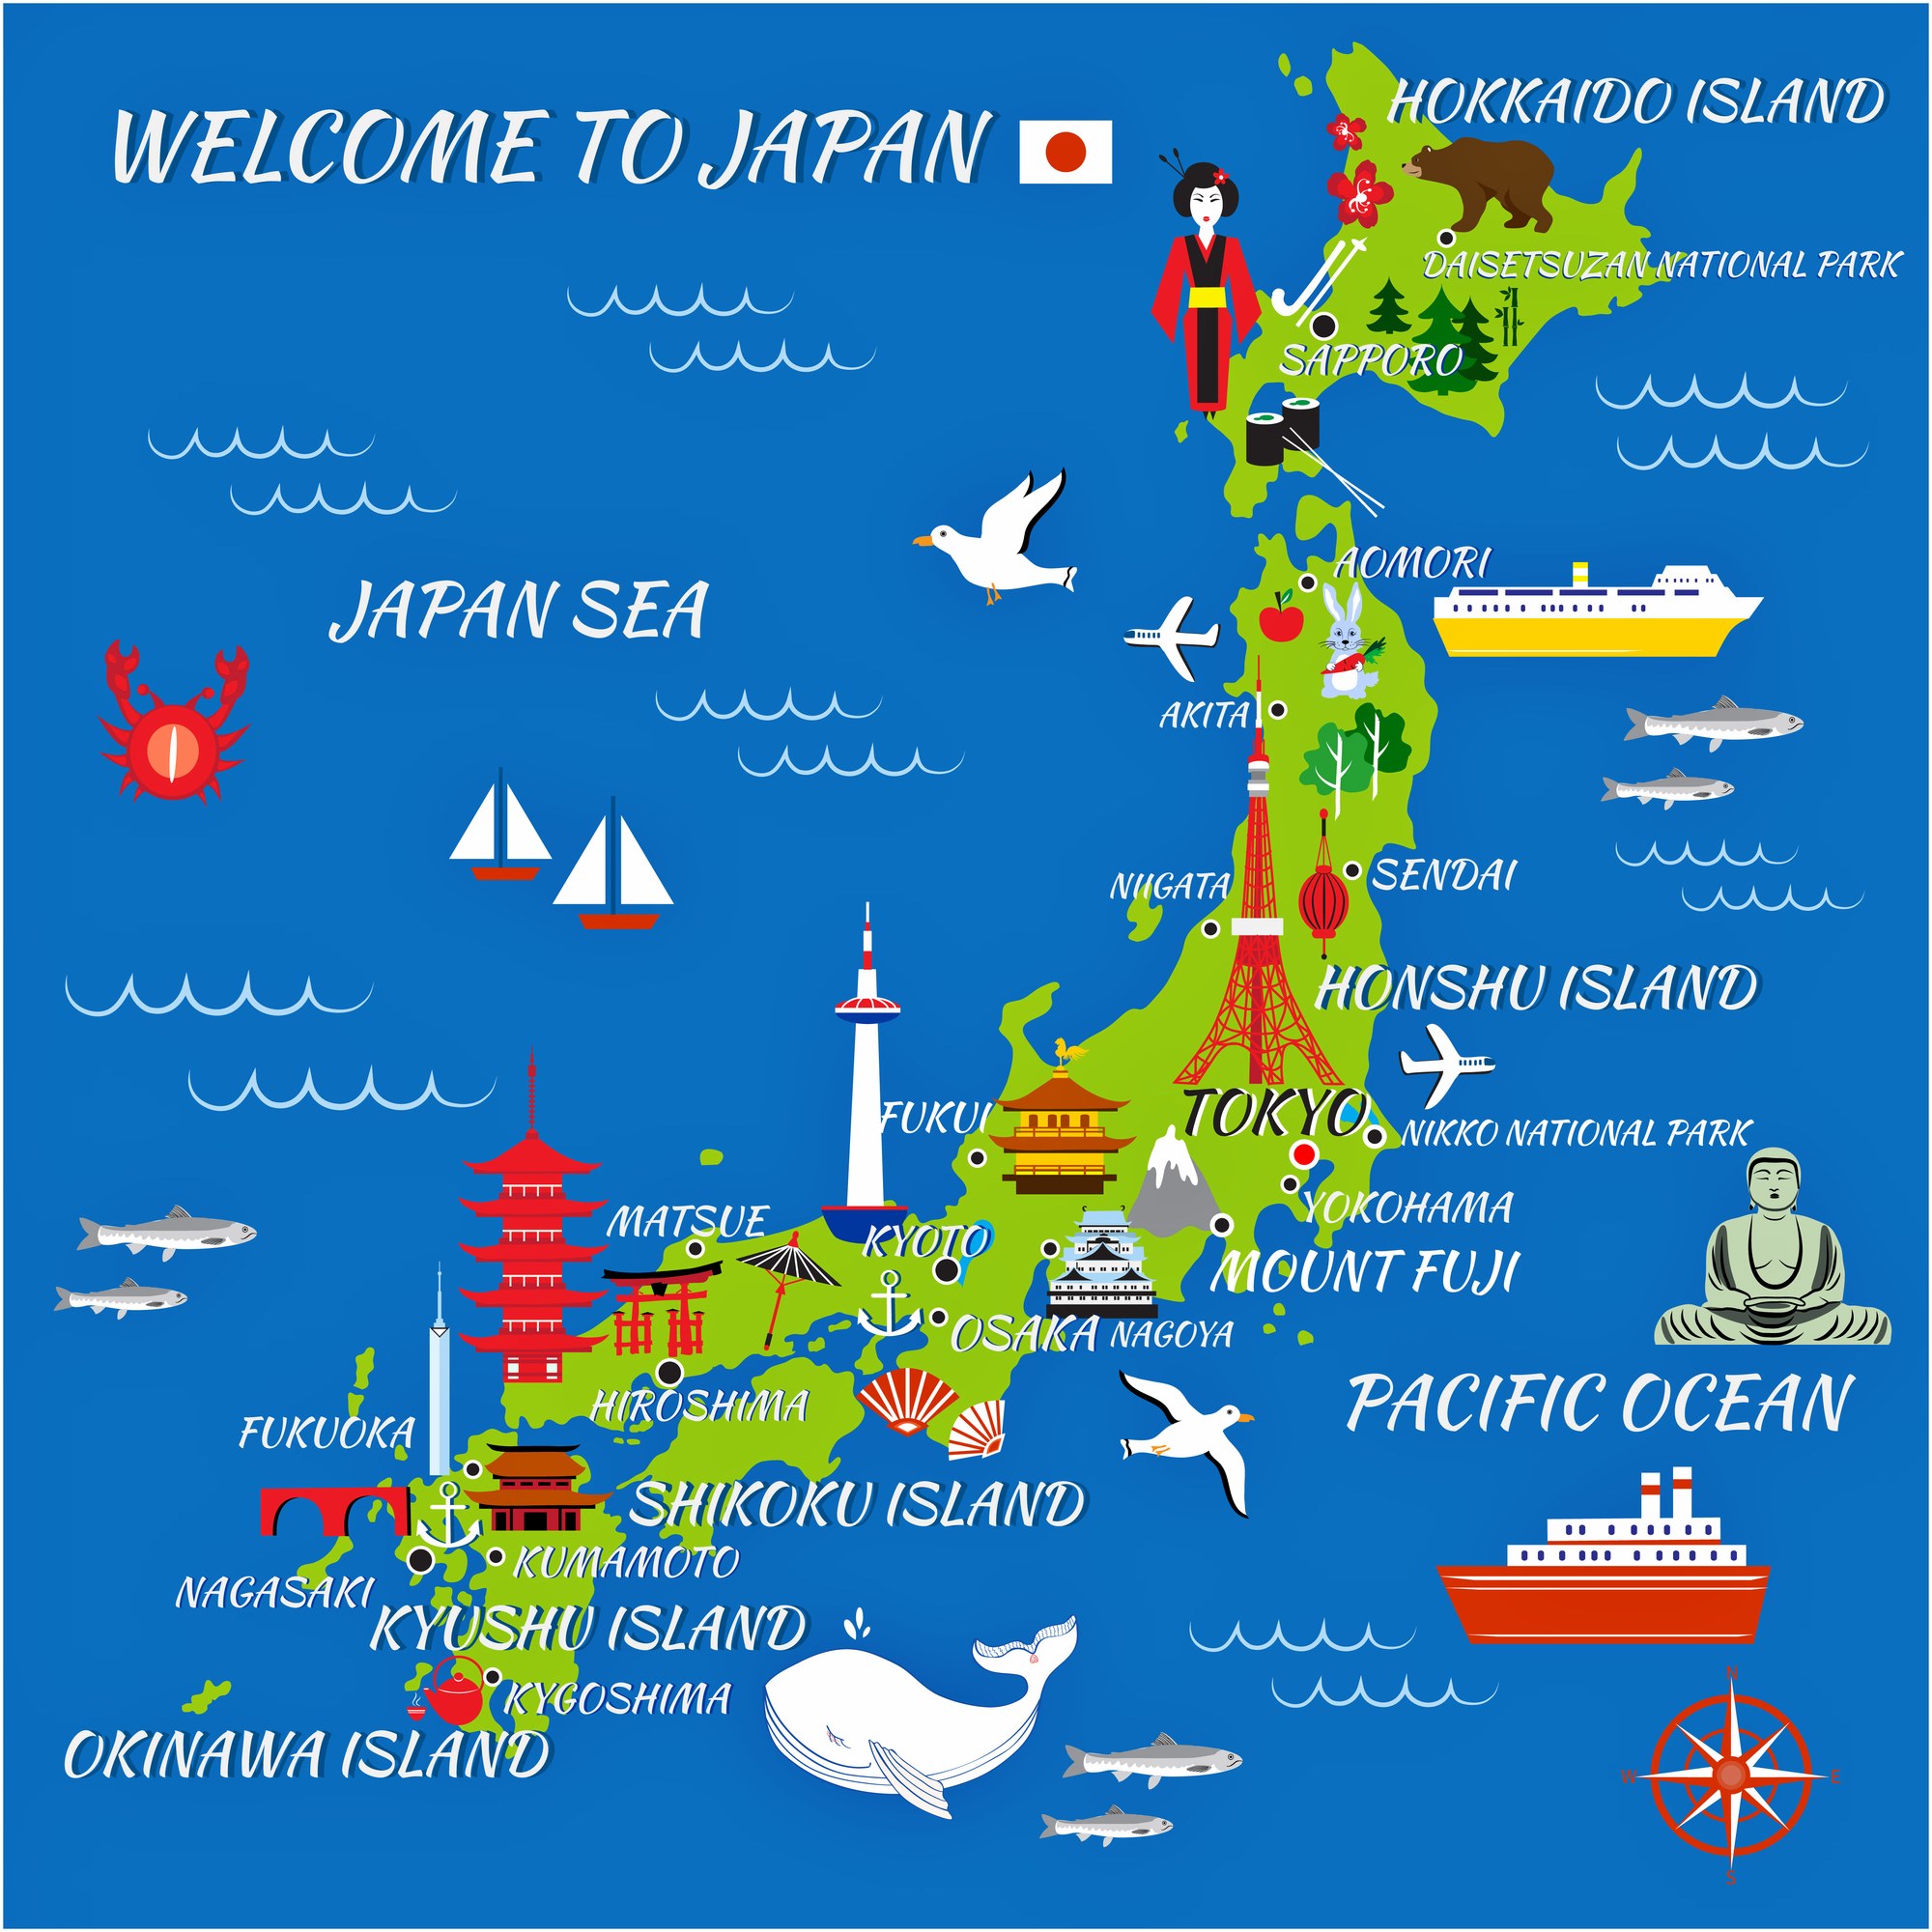 how many cities to visit in japan